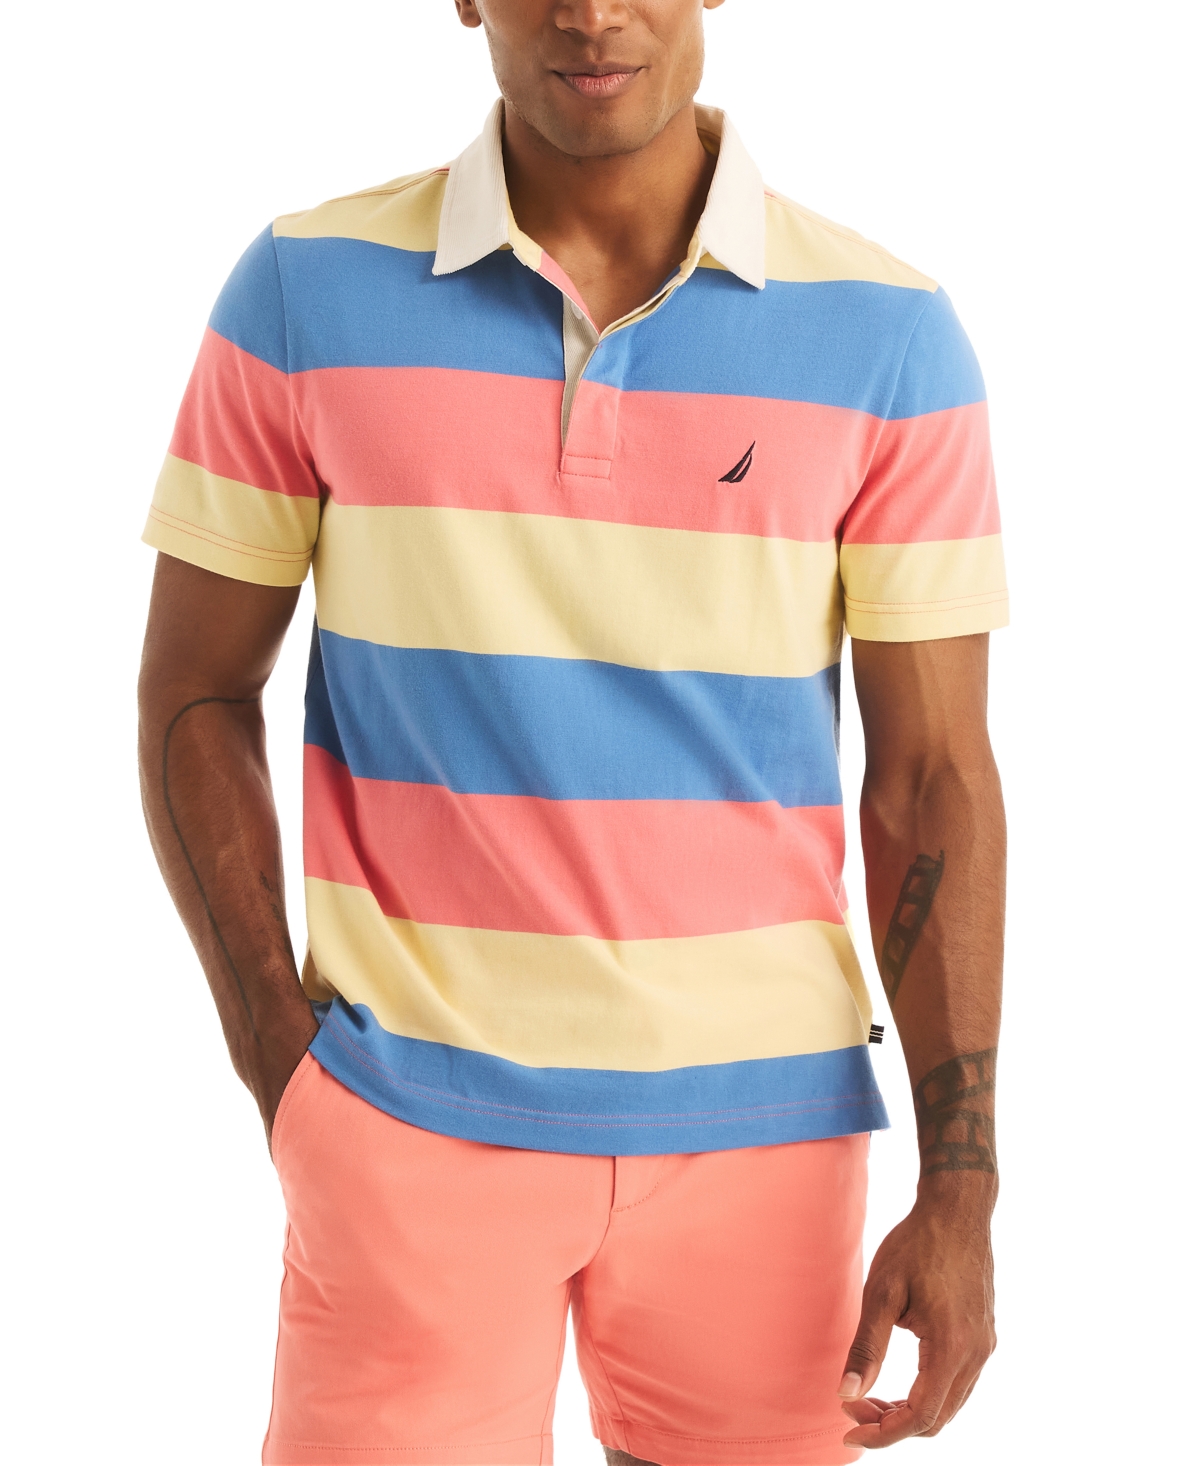 Men's Classic-Fit Stripe Rugby Polo Shirt - Tango Red